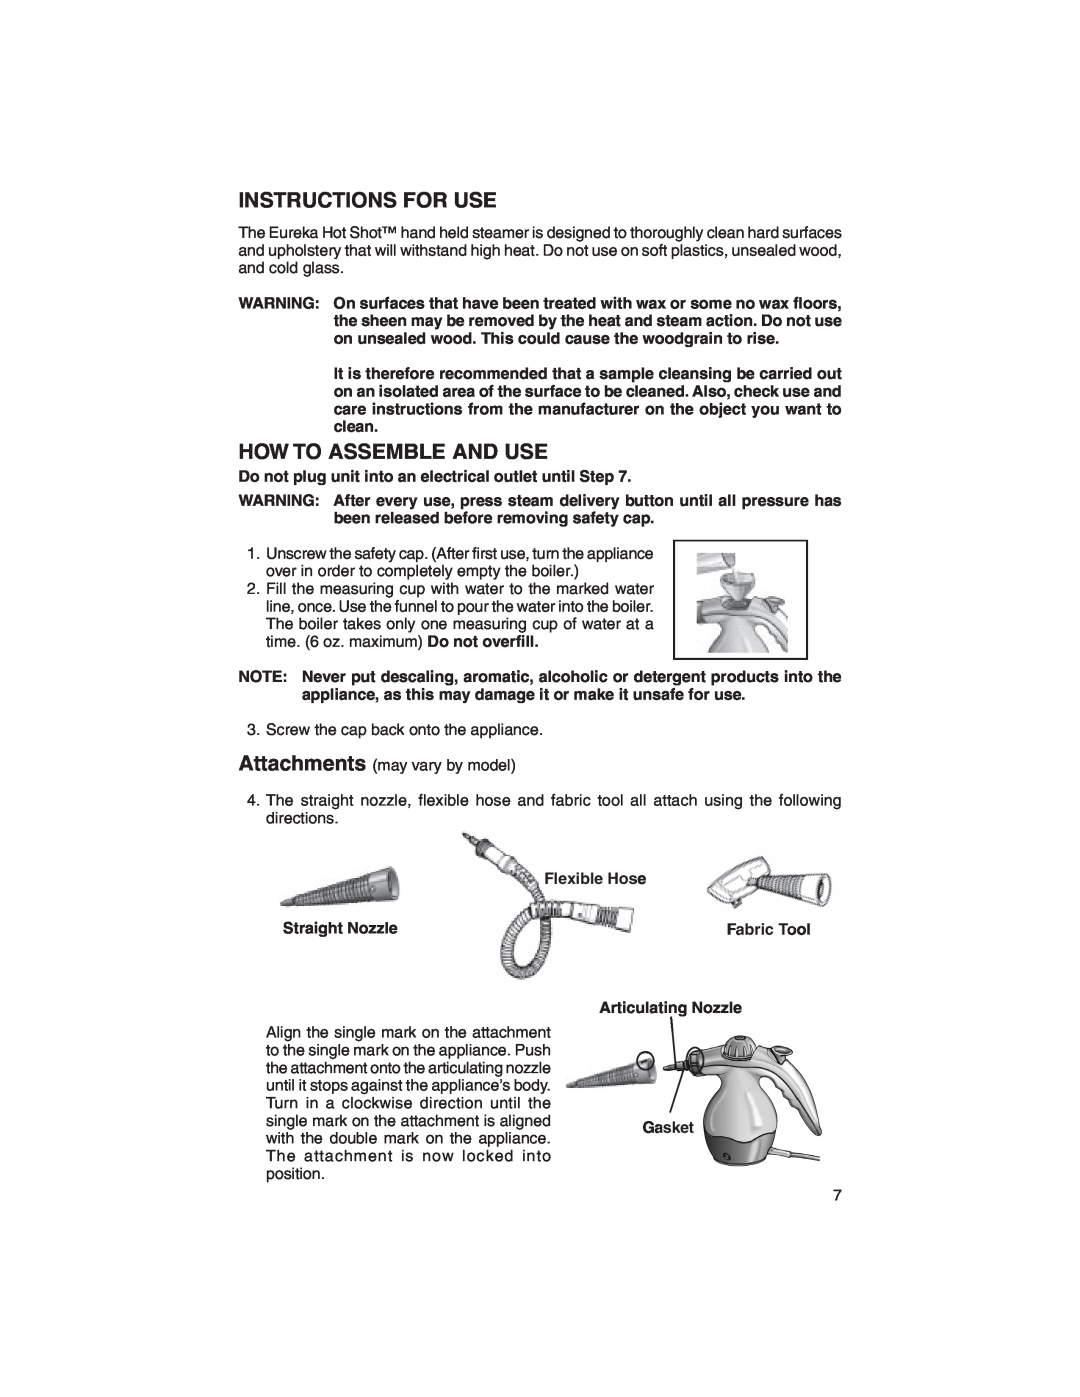 Eureka 340, 350 warranty Instructions For Use, How To Assemble And Use 